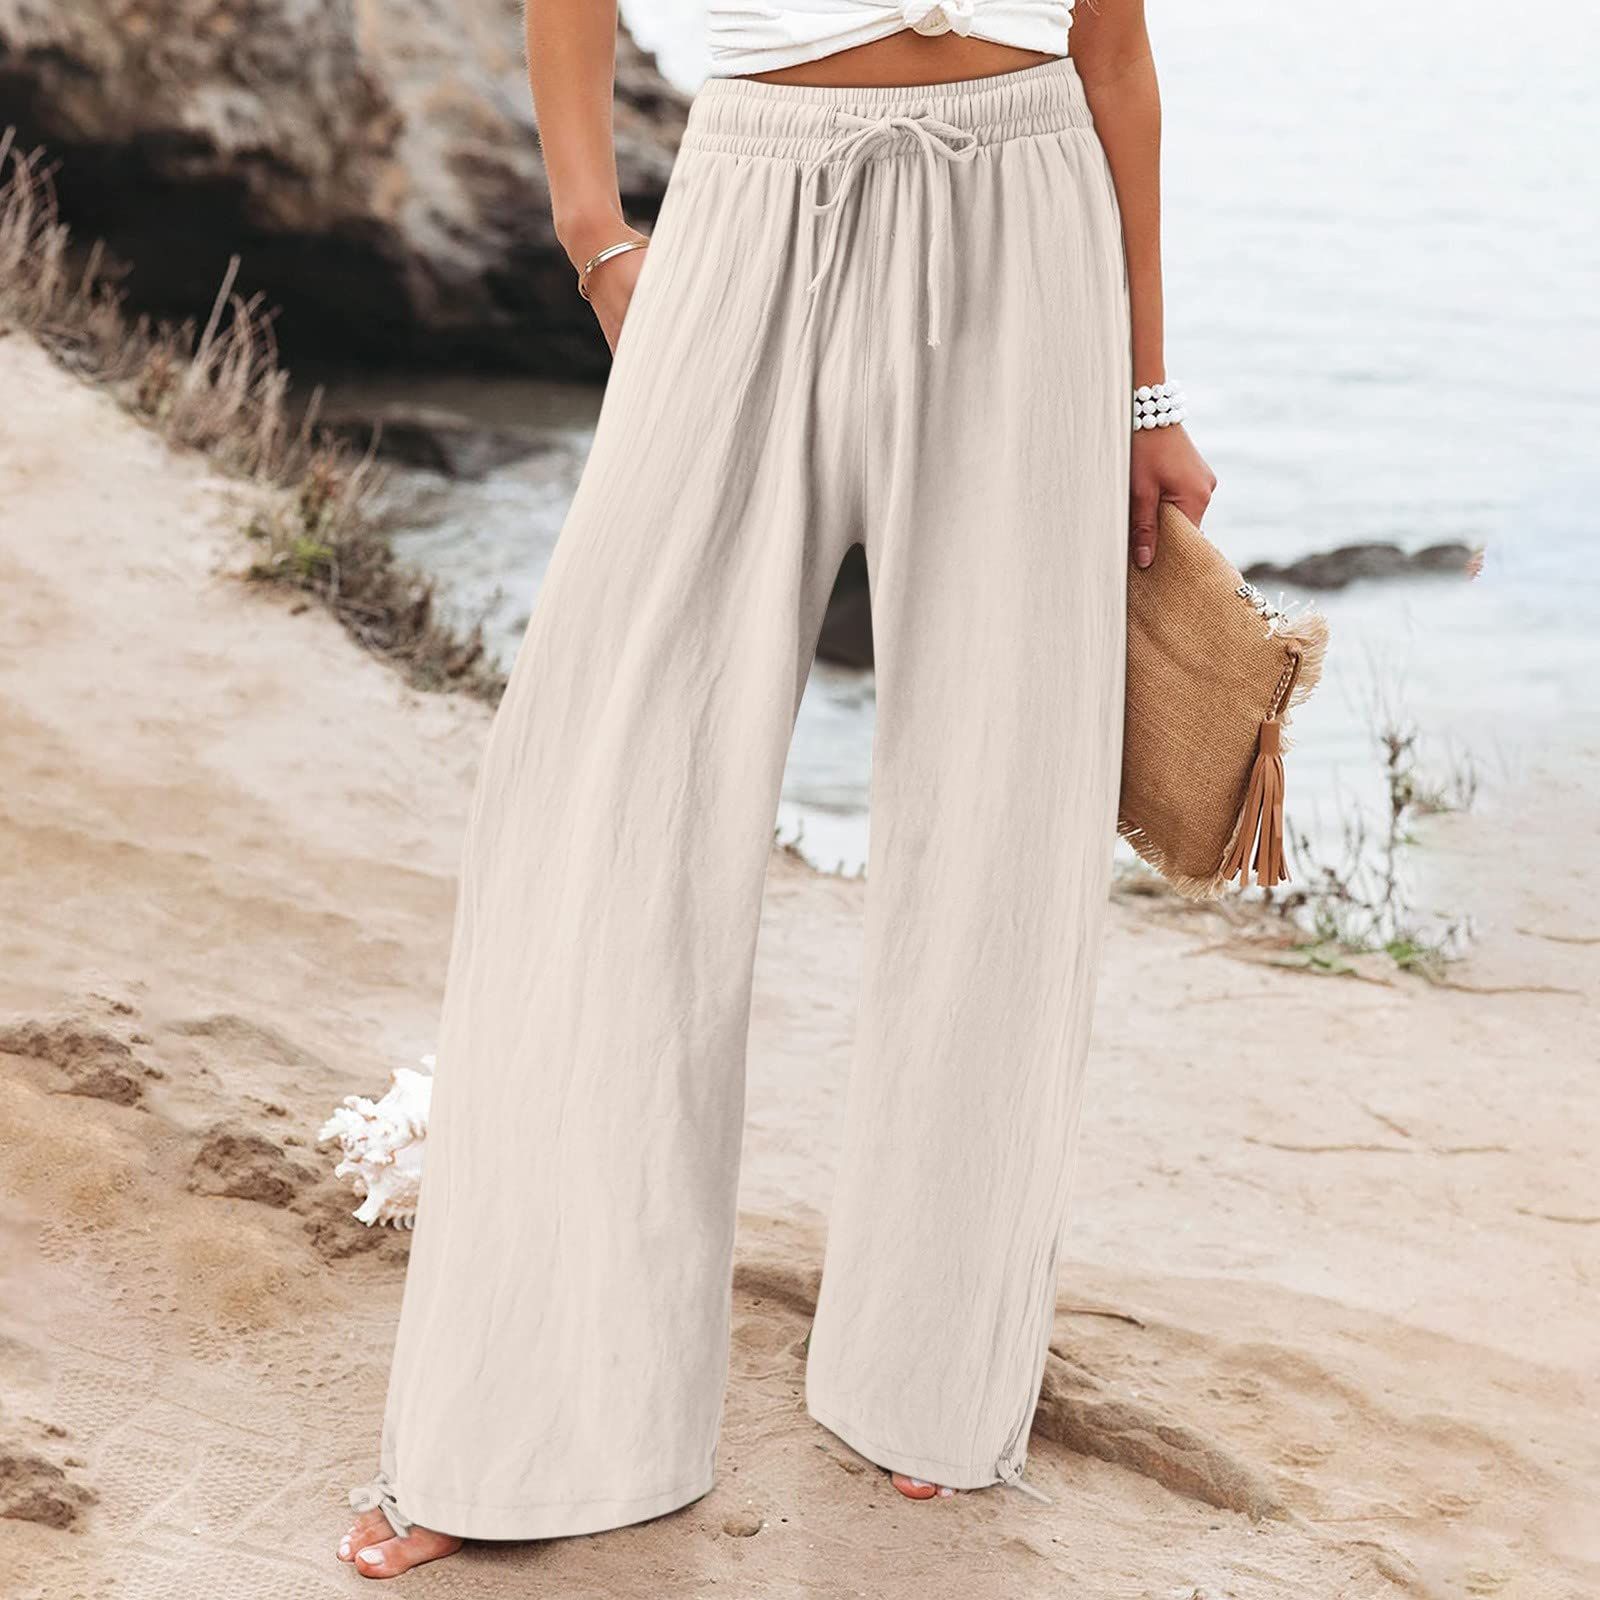 The 15 Best Travel Pants of 2023 Tested and Reviewed